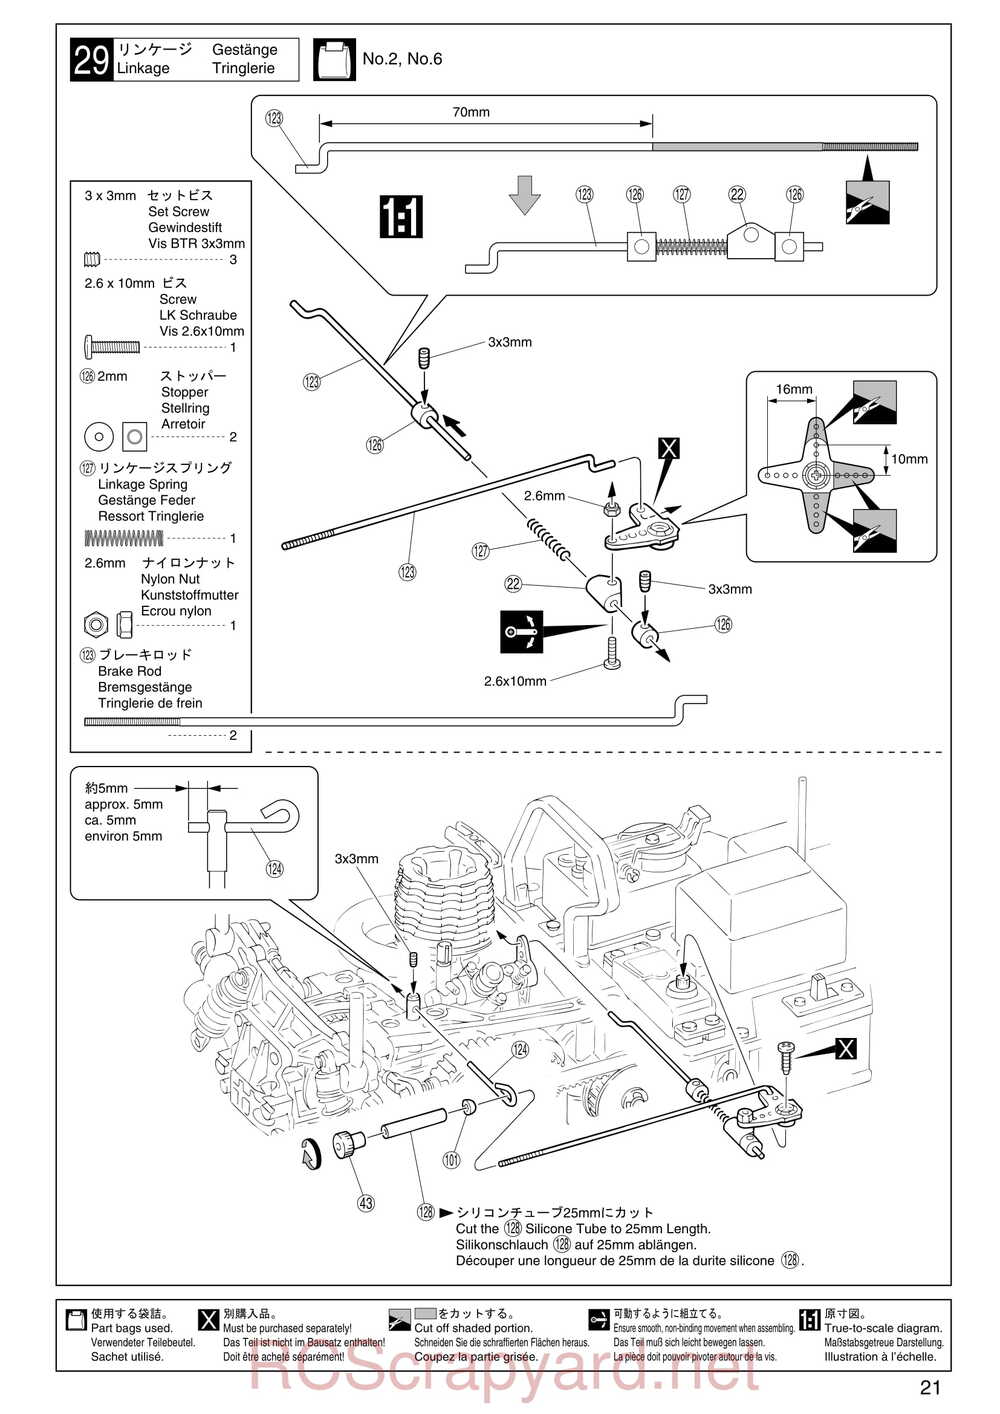 Kyosho - 31122 - V-One S2 - Manual - Page 21